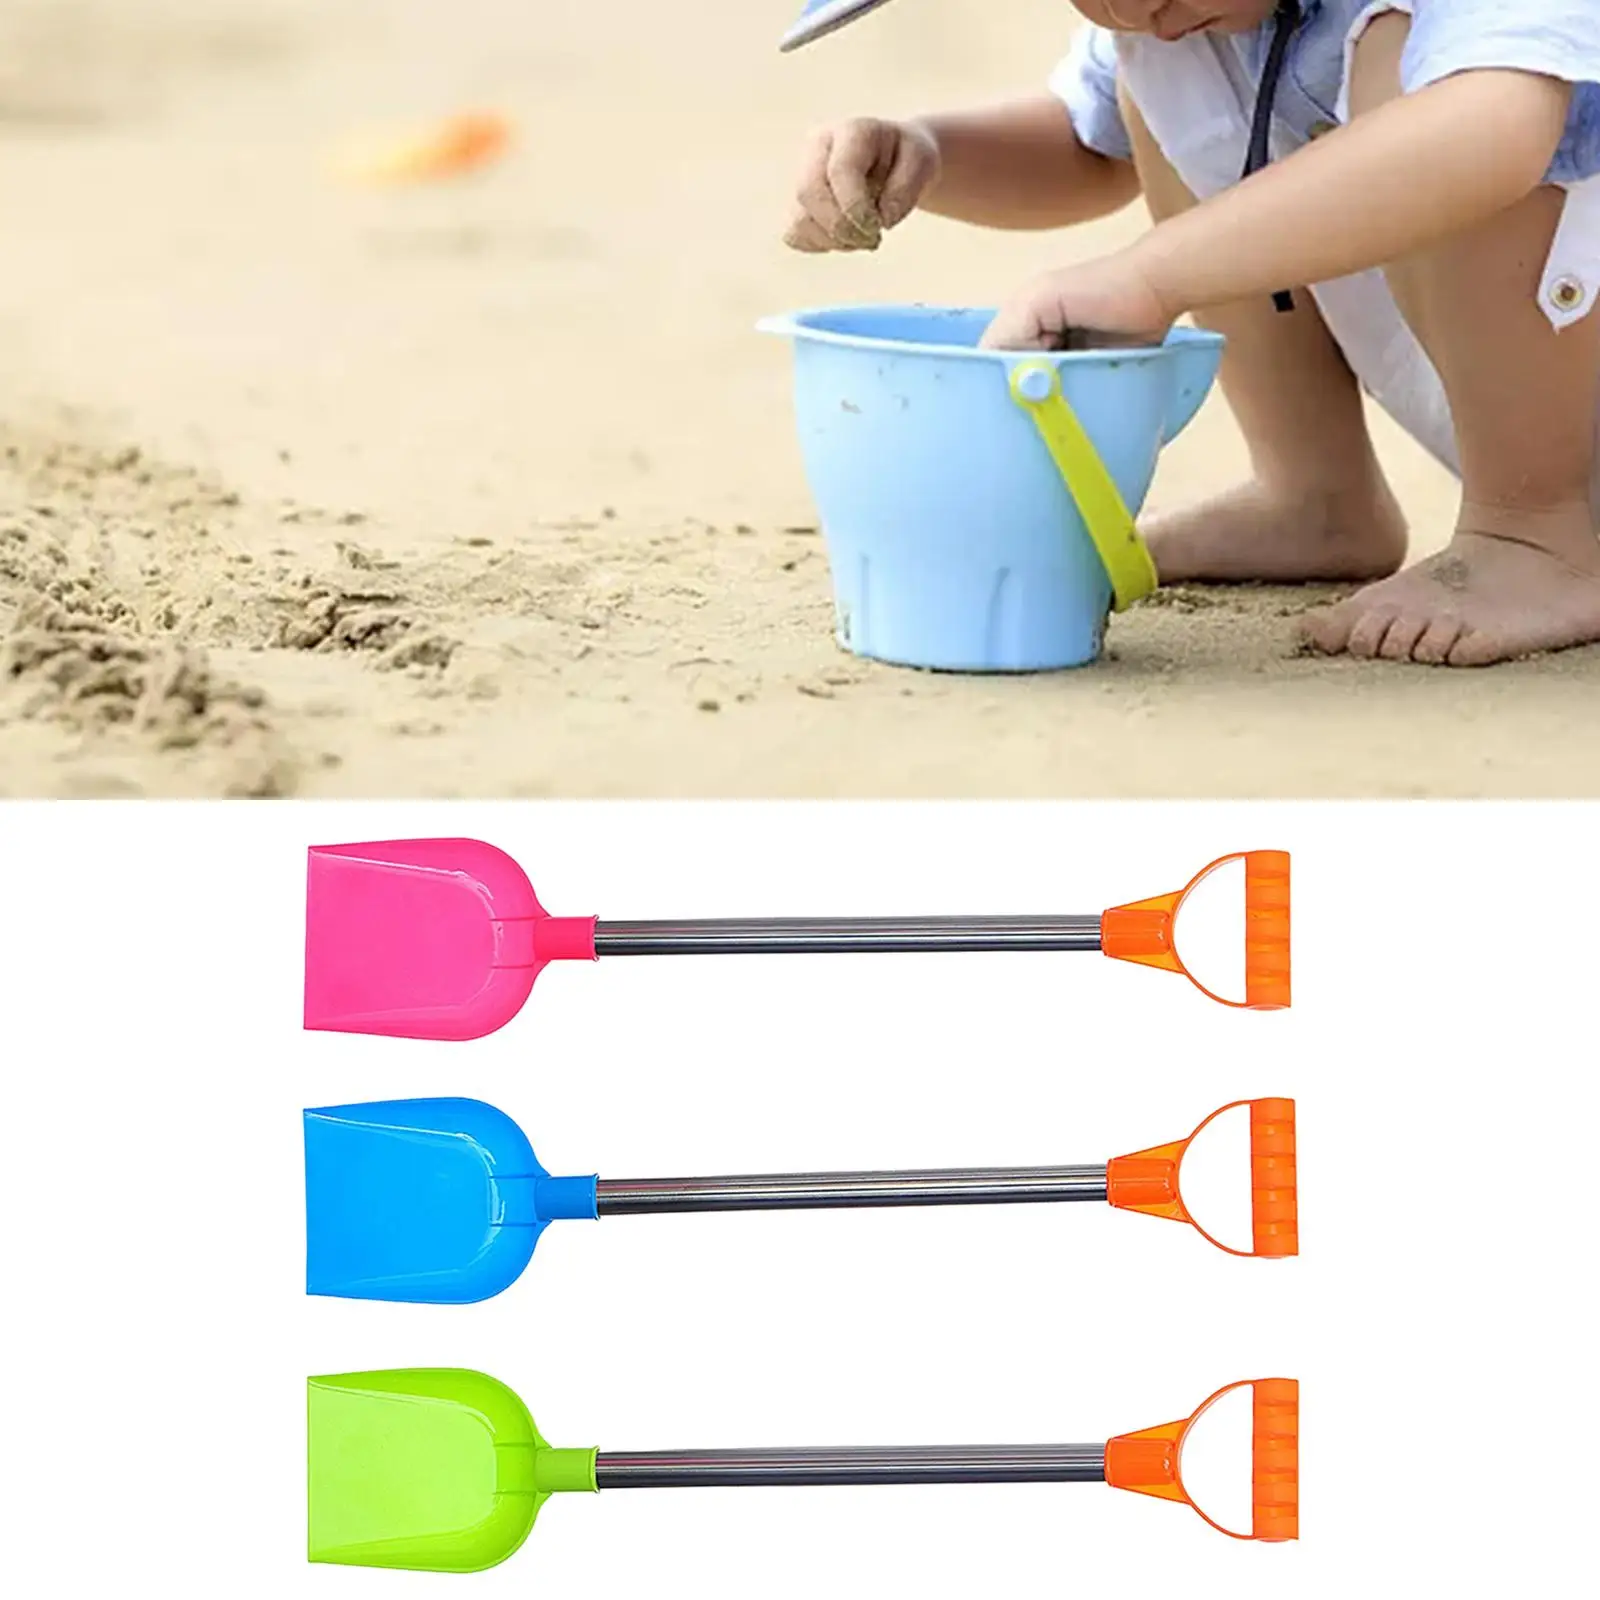 3 Pieces Child Sand Beach Toys Toy Outdoor Toy for Toddlers Children